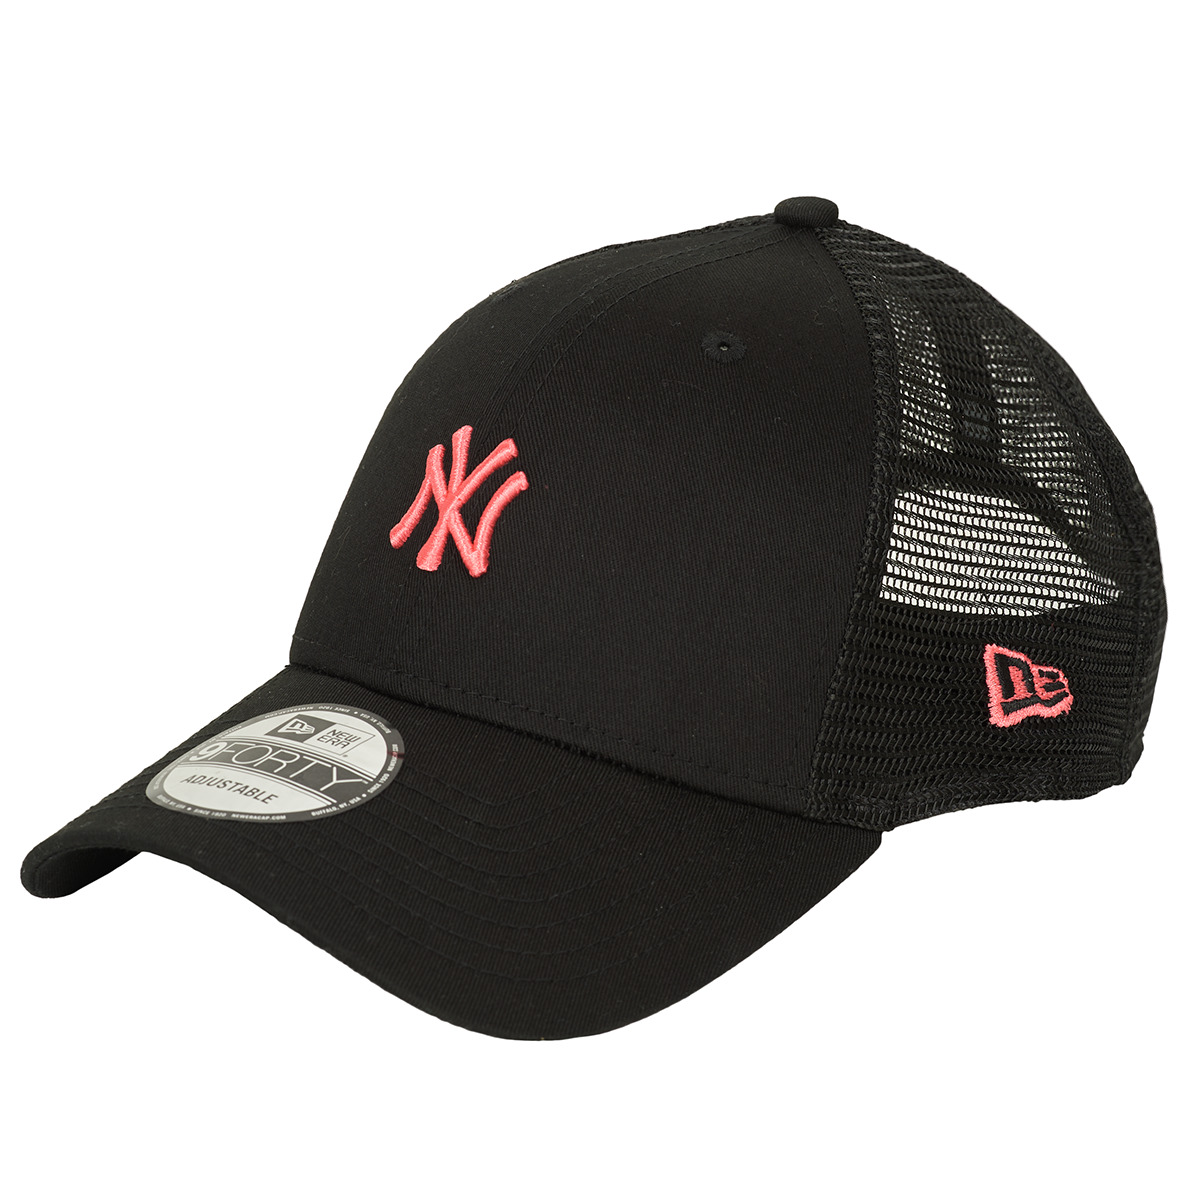 Clothes accessories Caps New-Era HOME FIELD 9FORTY TRUCKER NEW YORK YANKEES BLKLVR Black